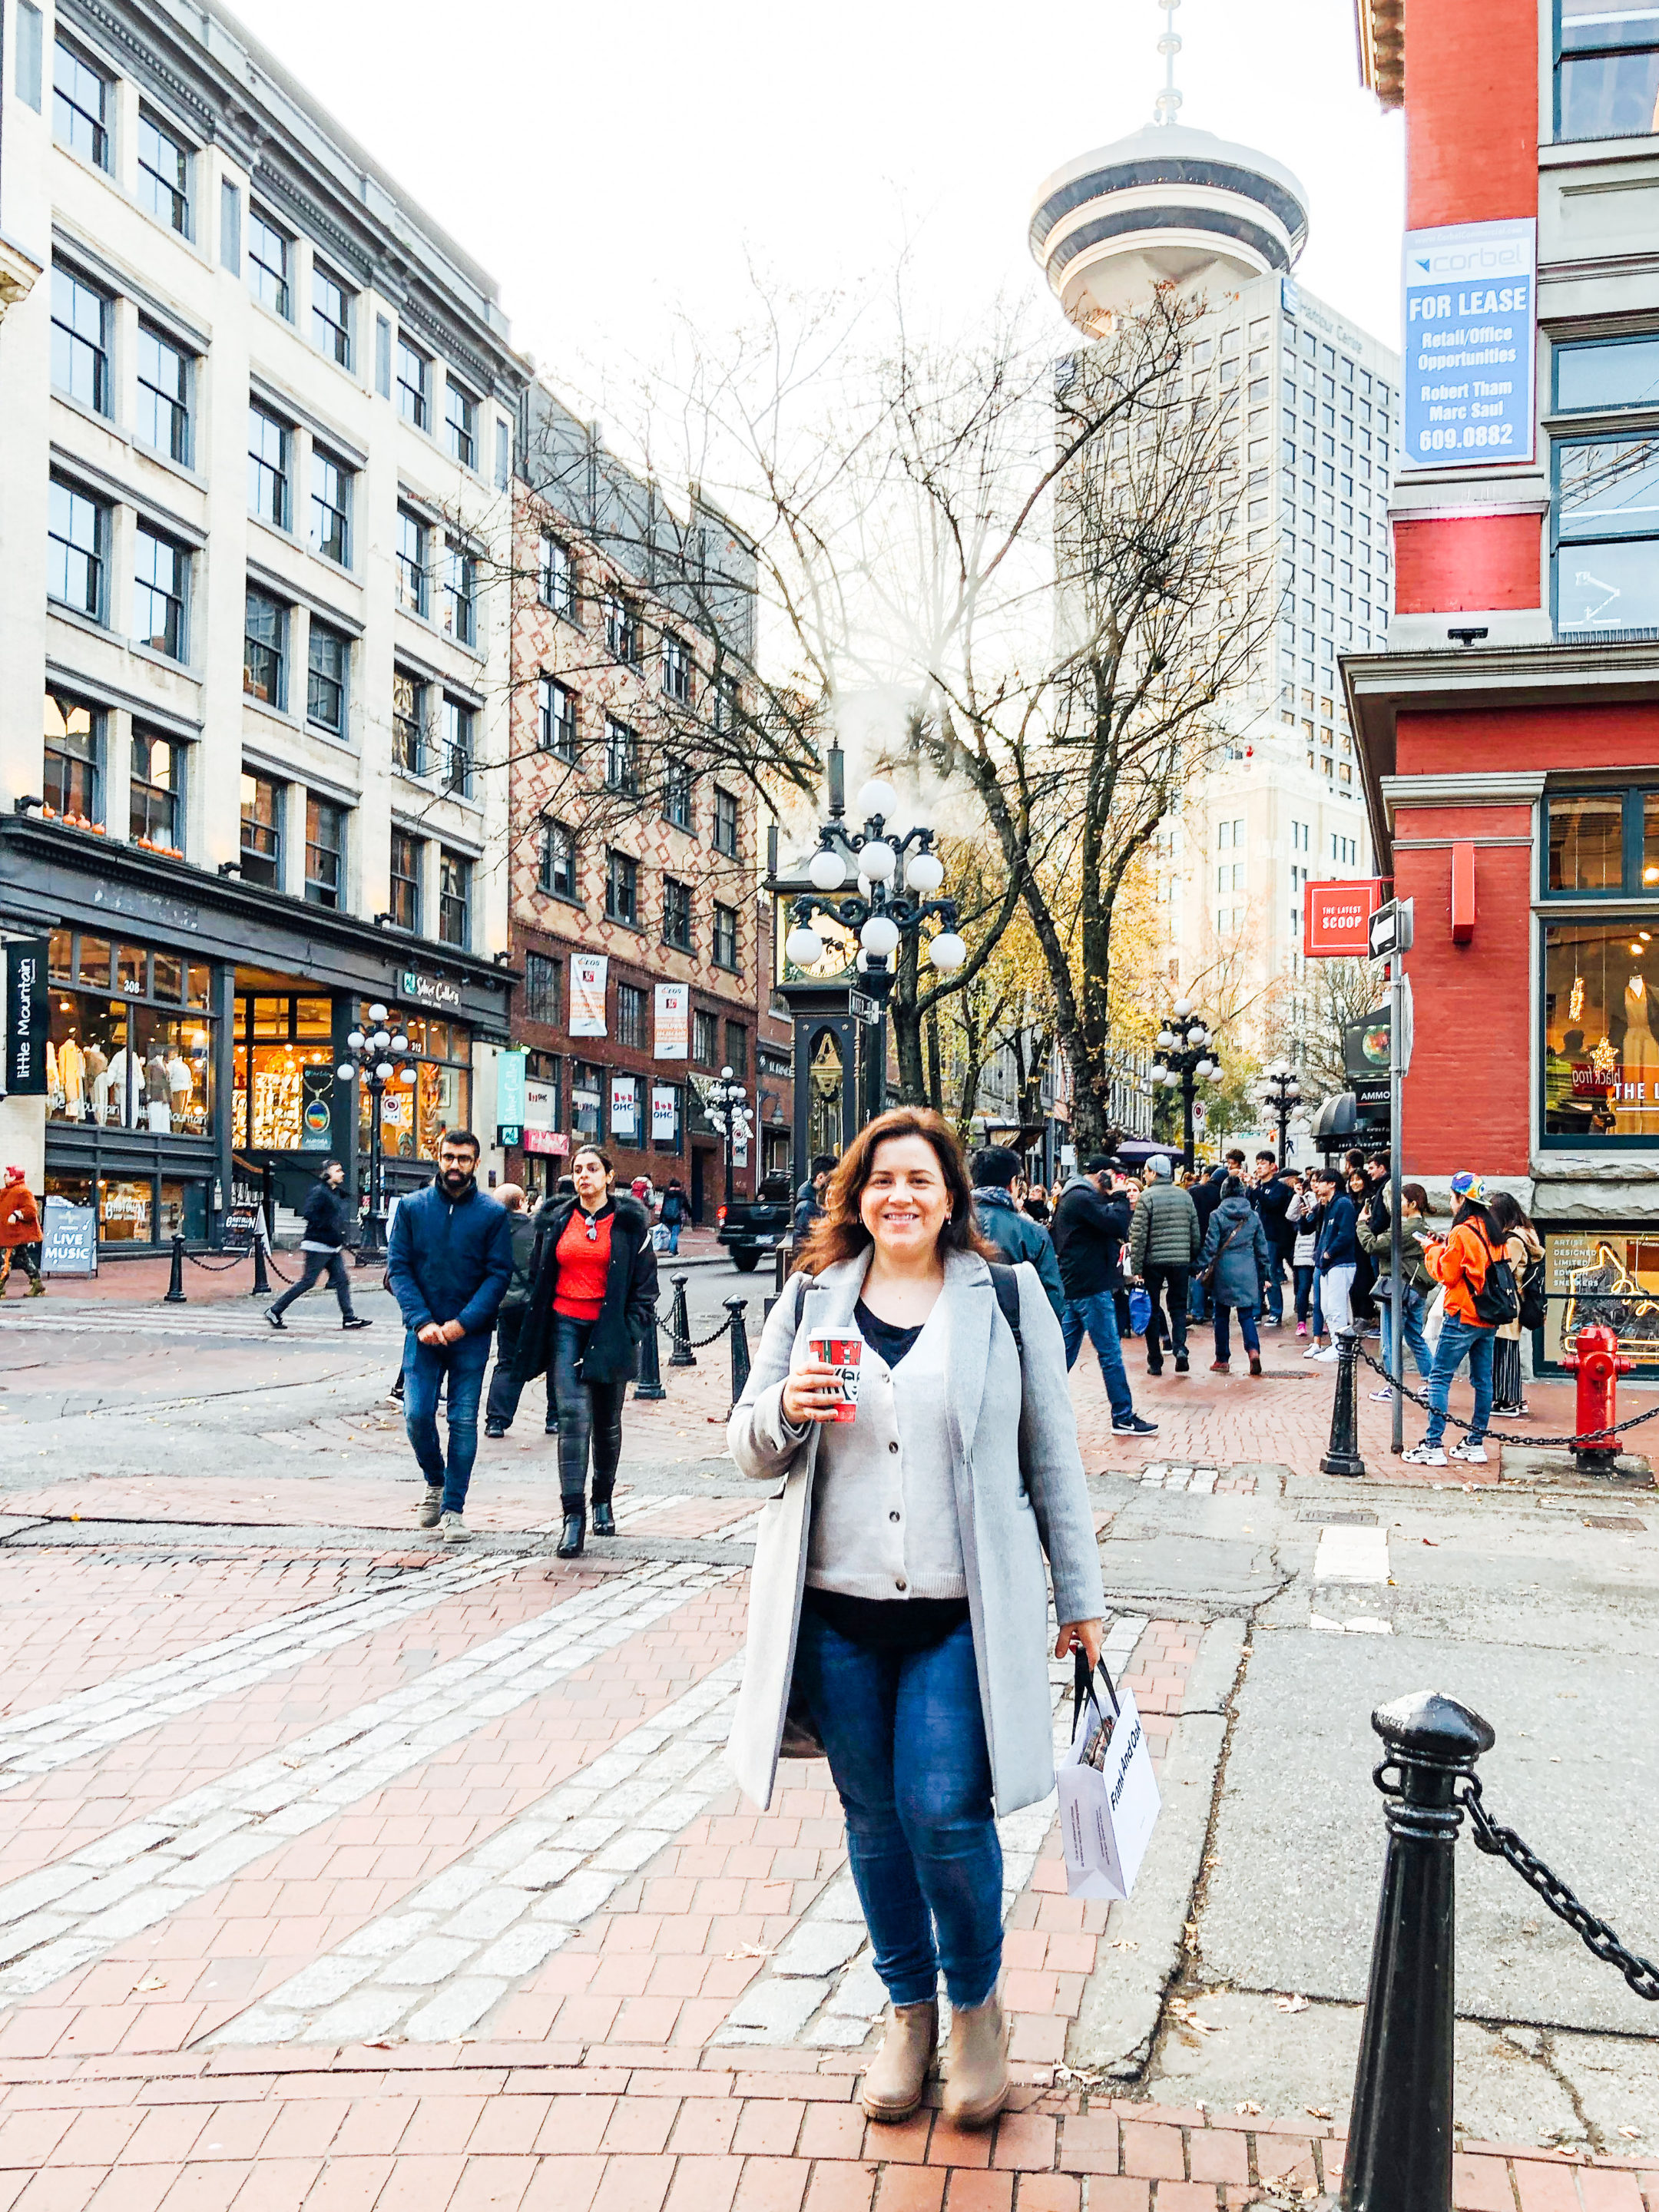 Gastown in Vancouver